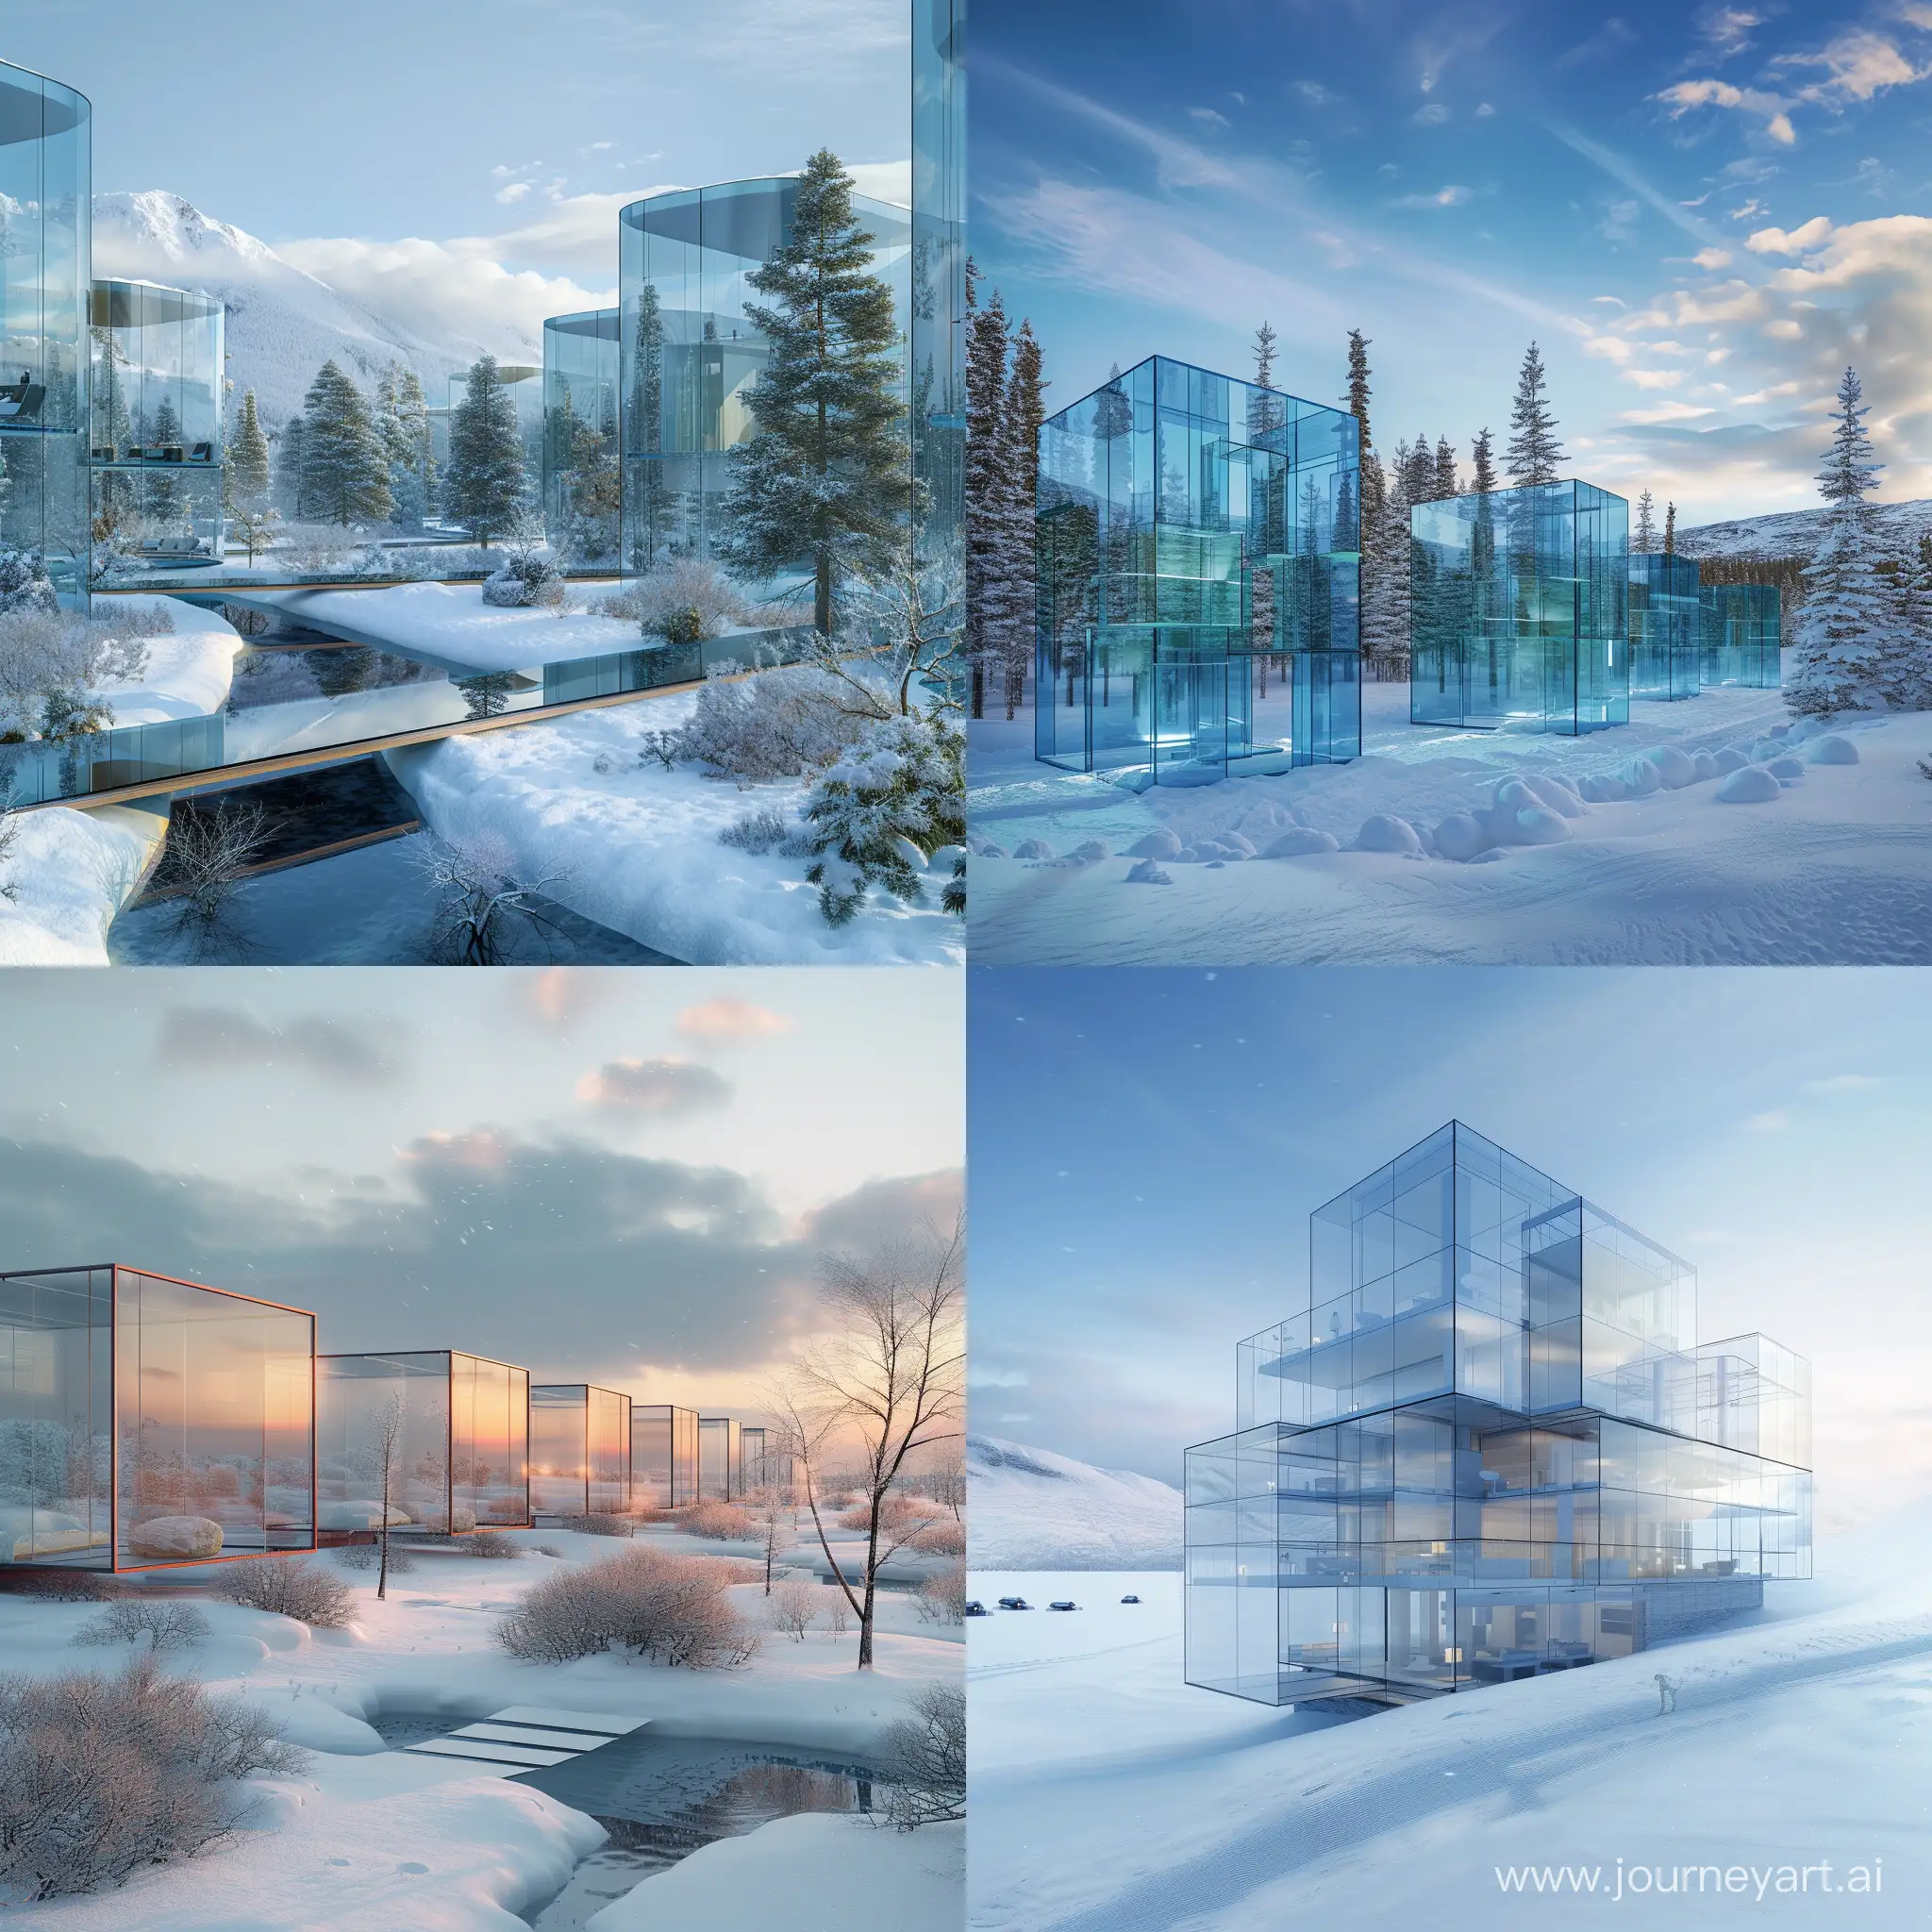 photorealistic, canon 5D, Imagine a winter wonderland like no other – 'Crystal Clear Condos.' Envision sleek, glass-encased retreats rising majestically amidst the serene, snowy terrain. --v 6 --ar 1:1 --no 7608